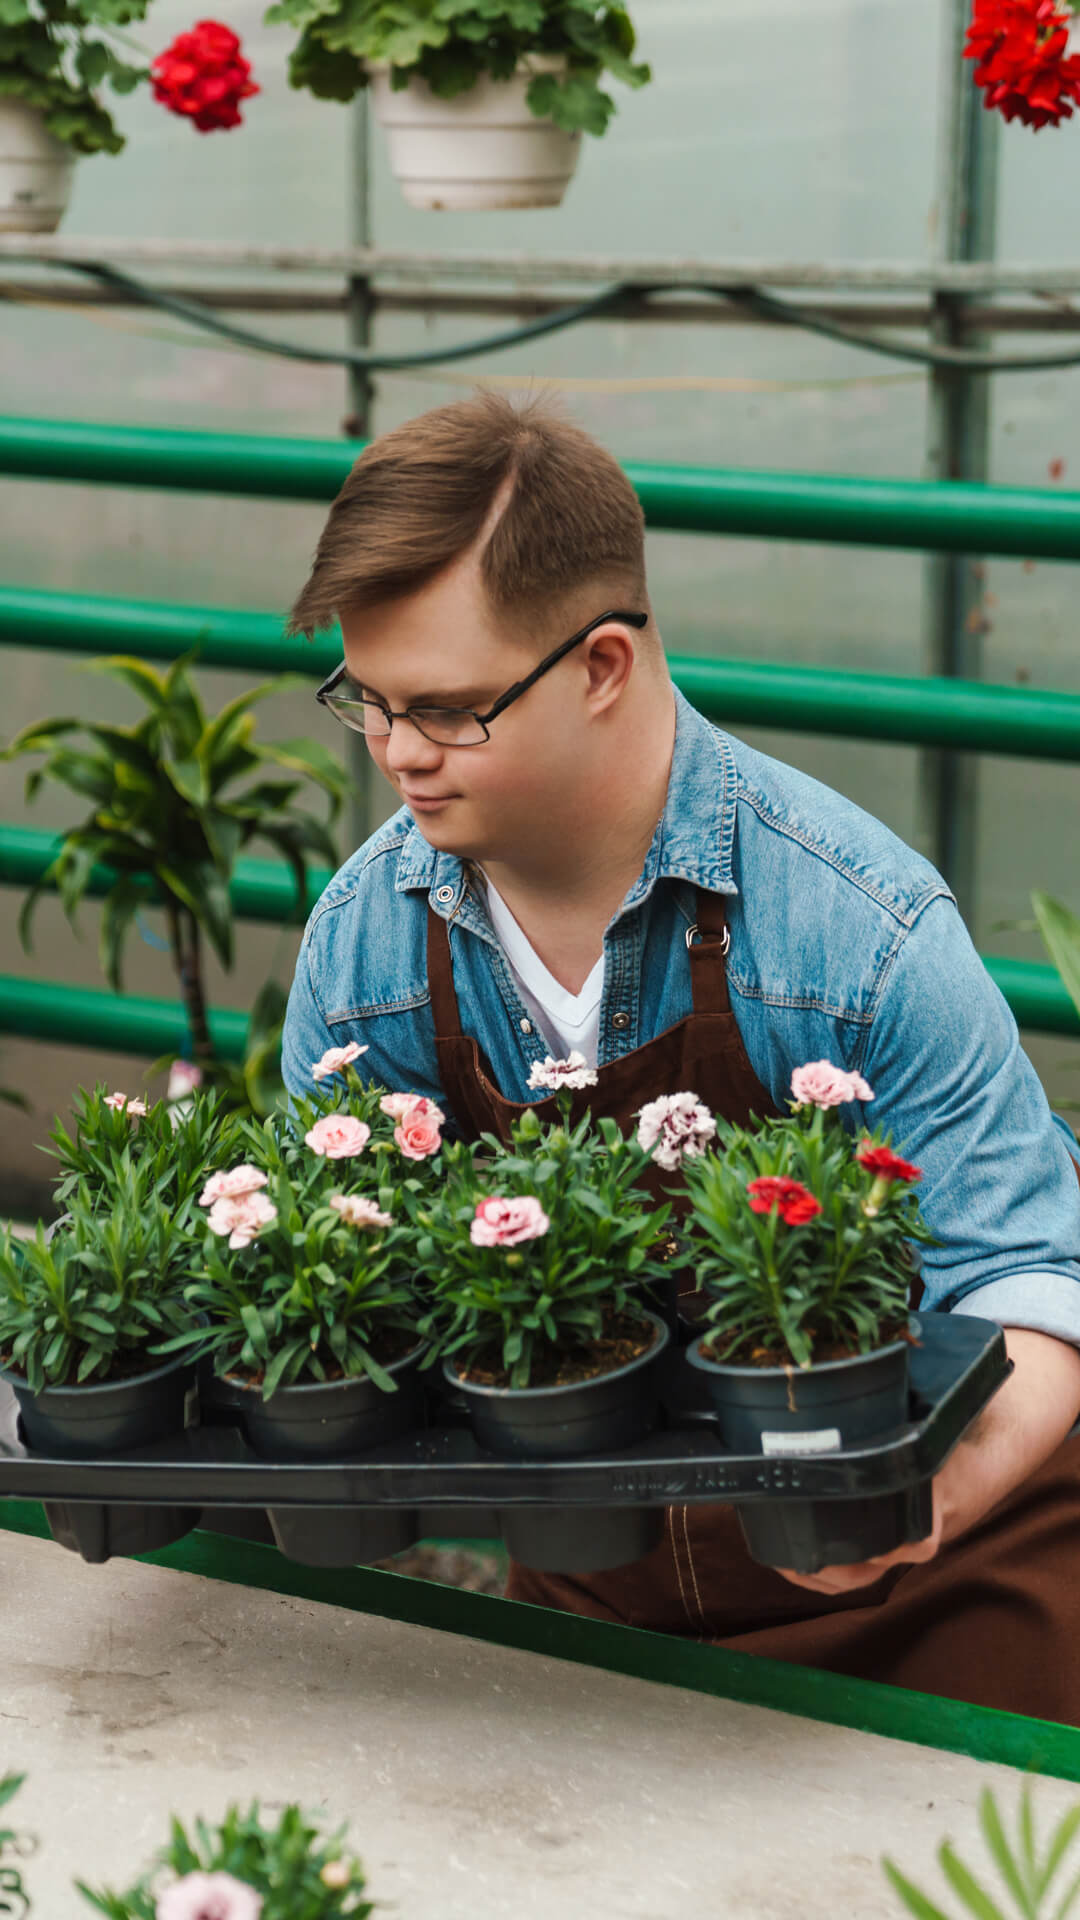 Person in denim caring for potted flowers.